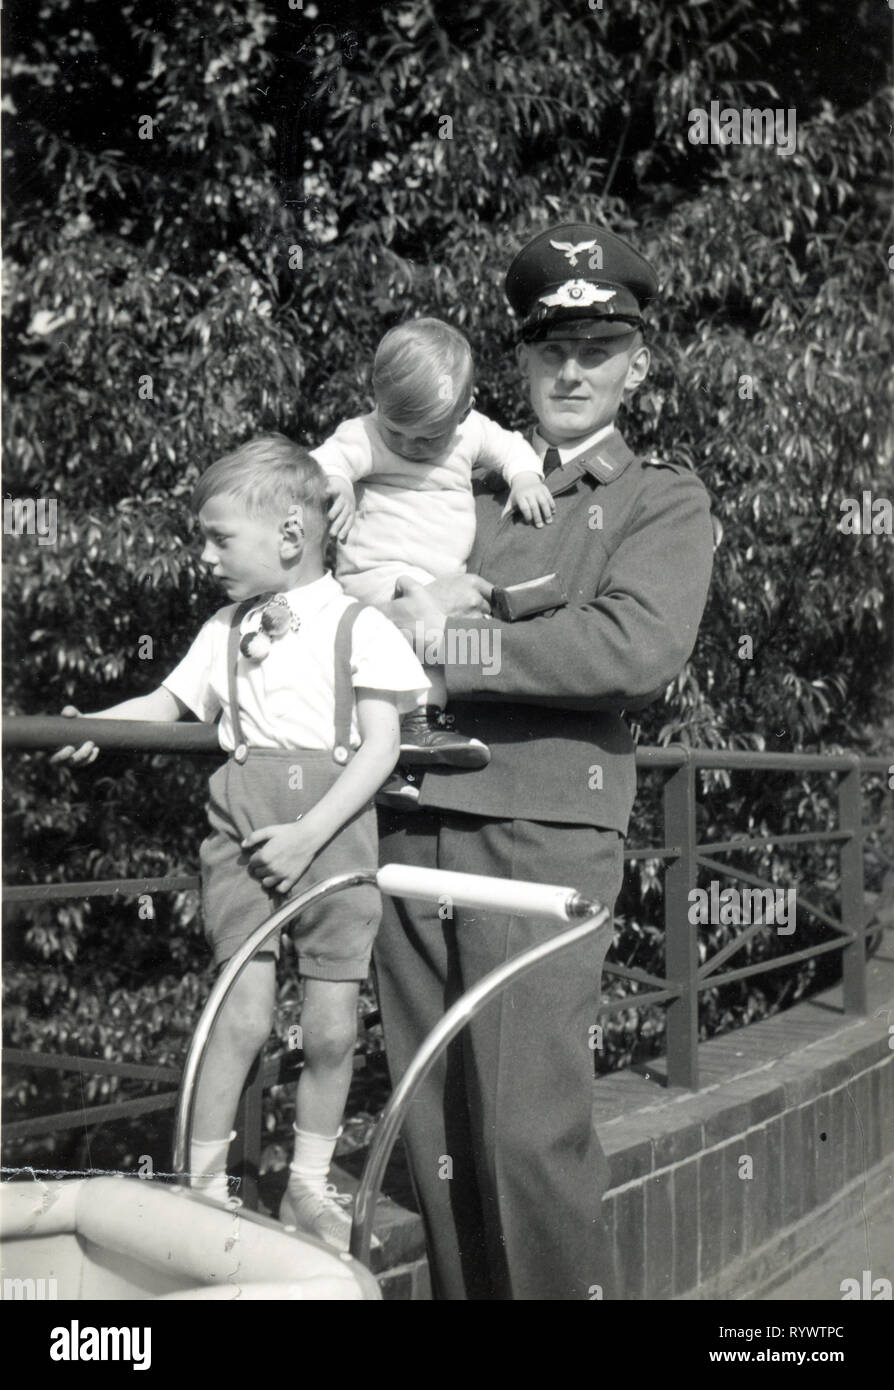 Leipzig, Germany - 1941: Luftwaffe officer and his sons Stock Photo